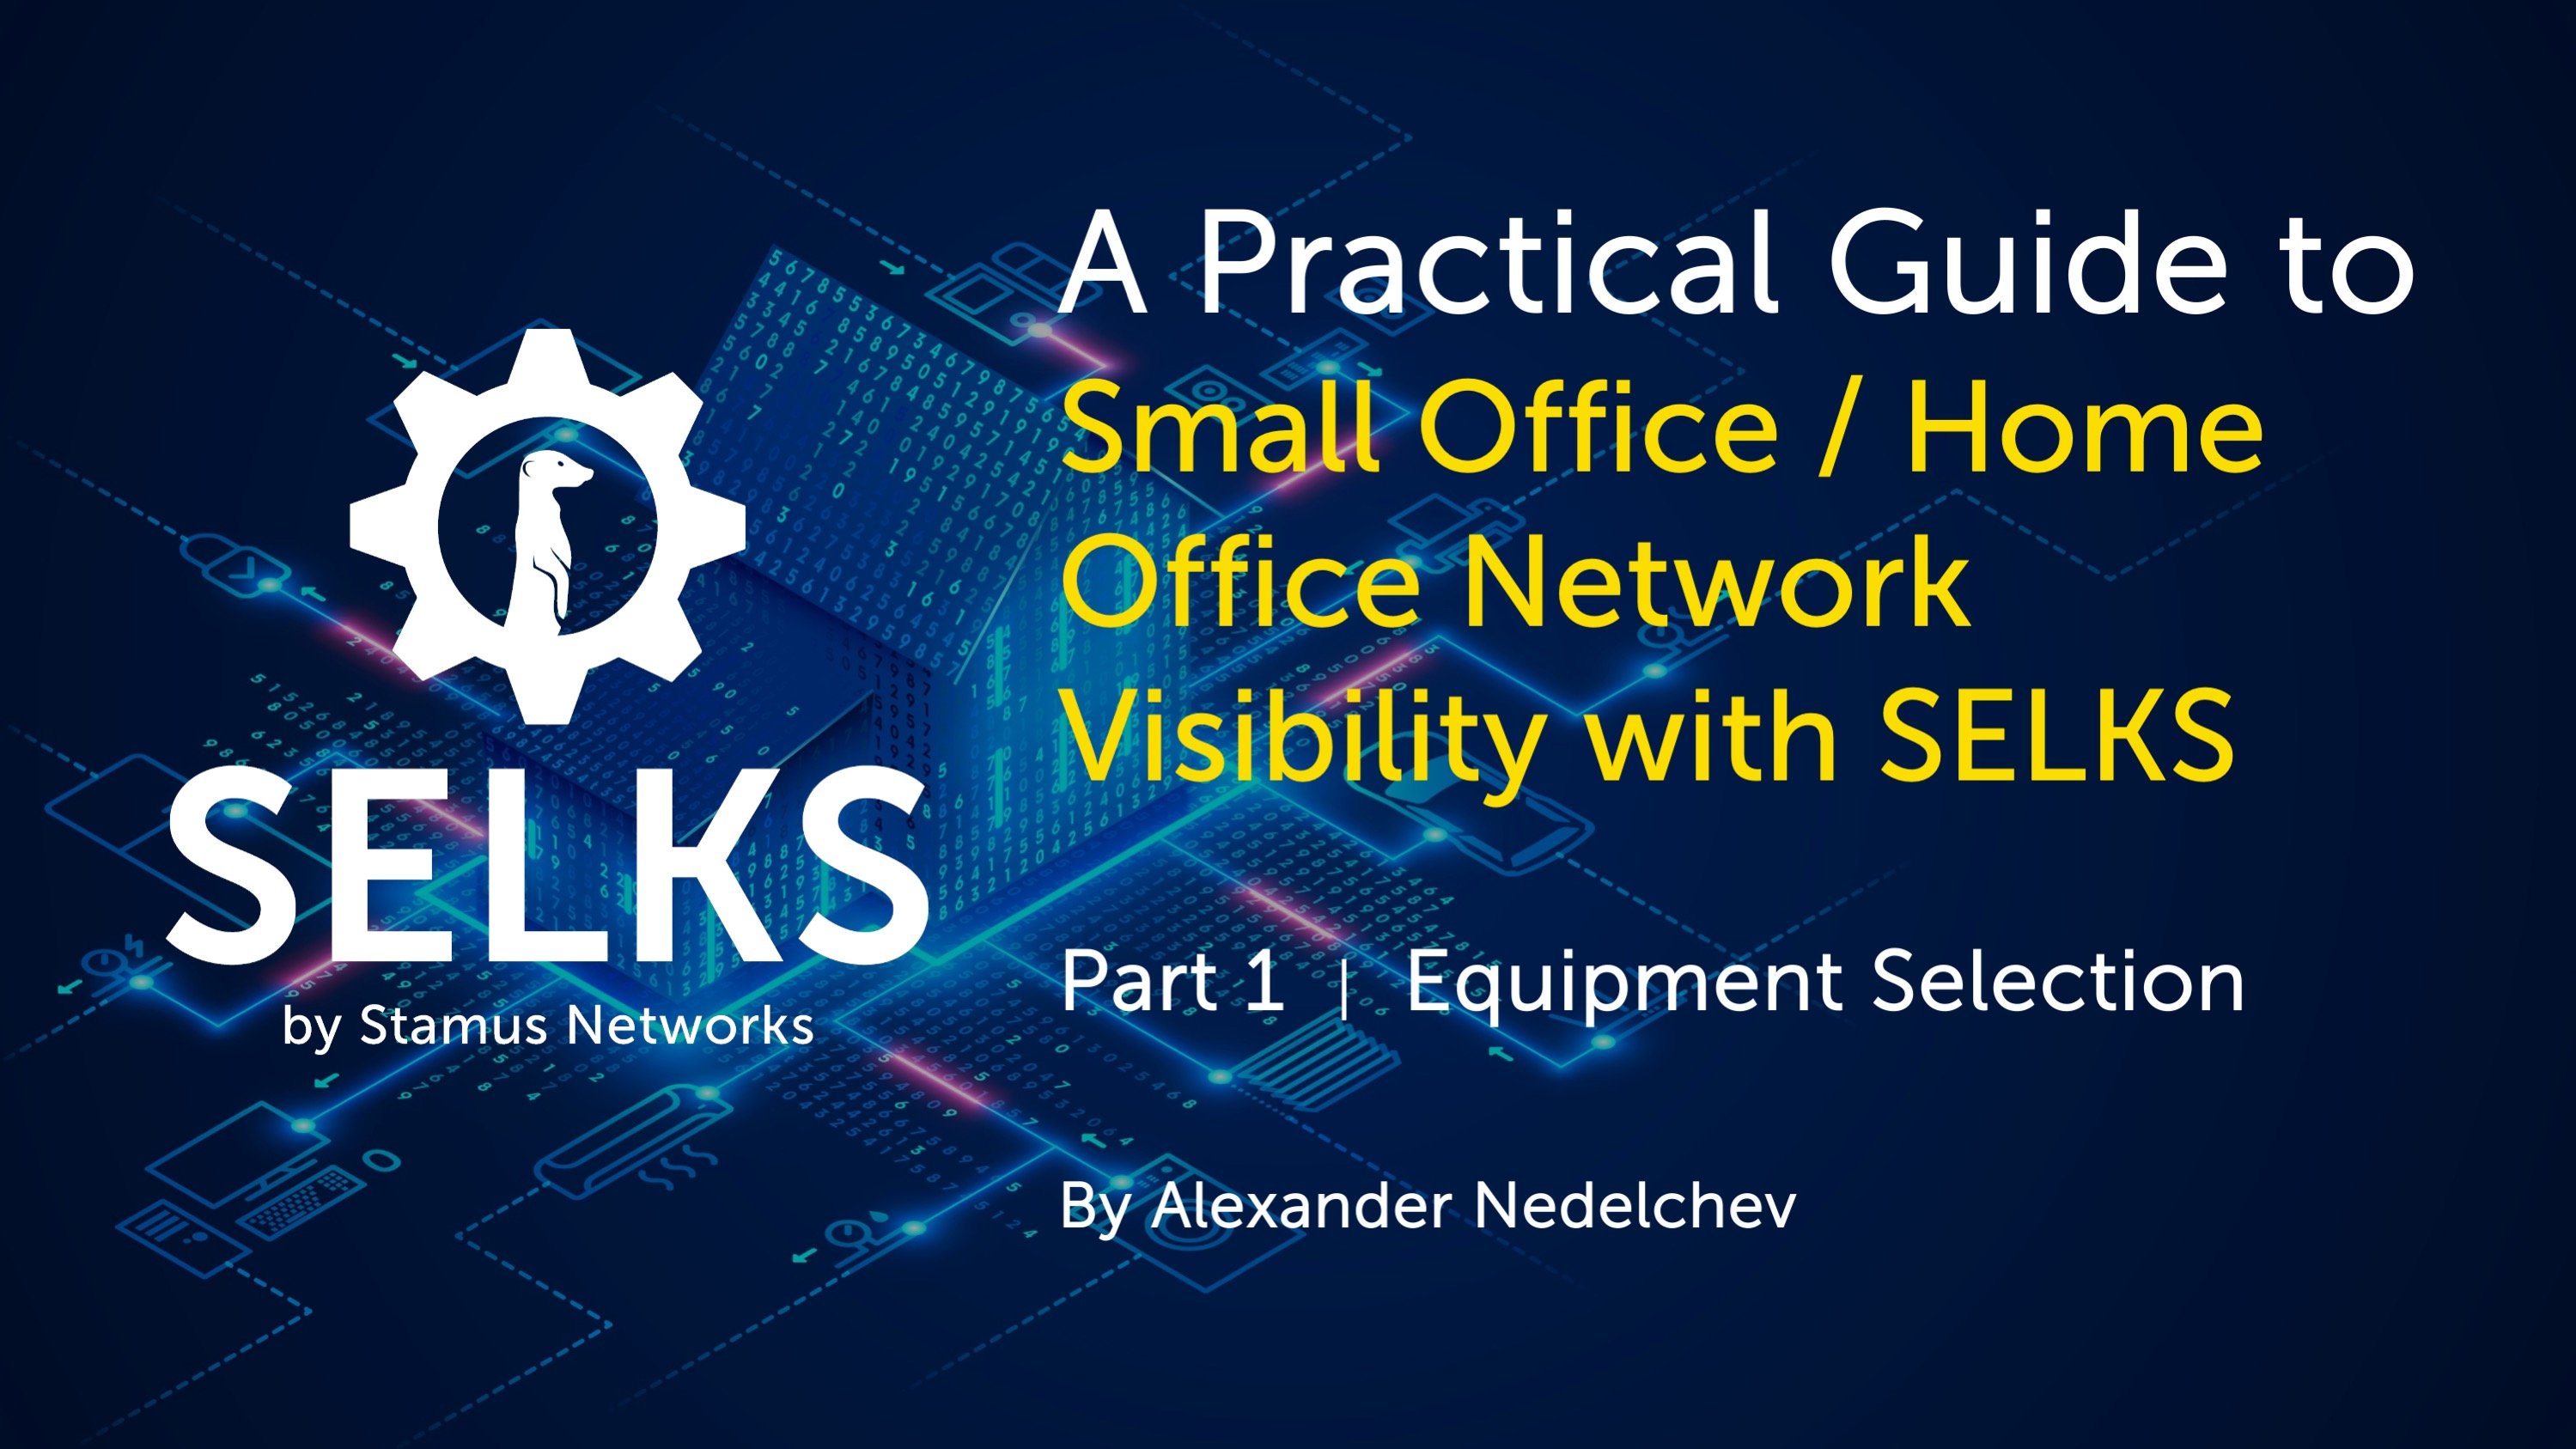 A Practicle Guide to Small Office / Home Office Network Visibility with SELKS: Part 1 - Equipment Selection